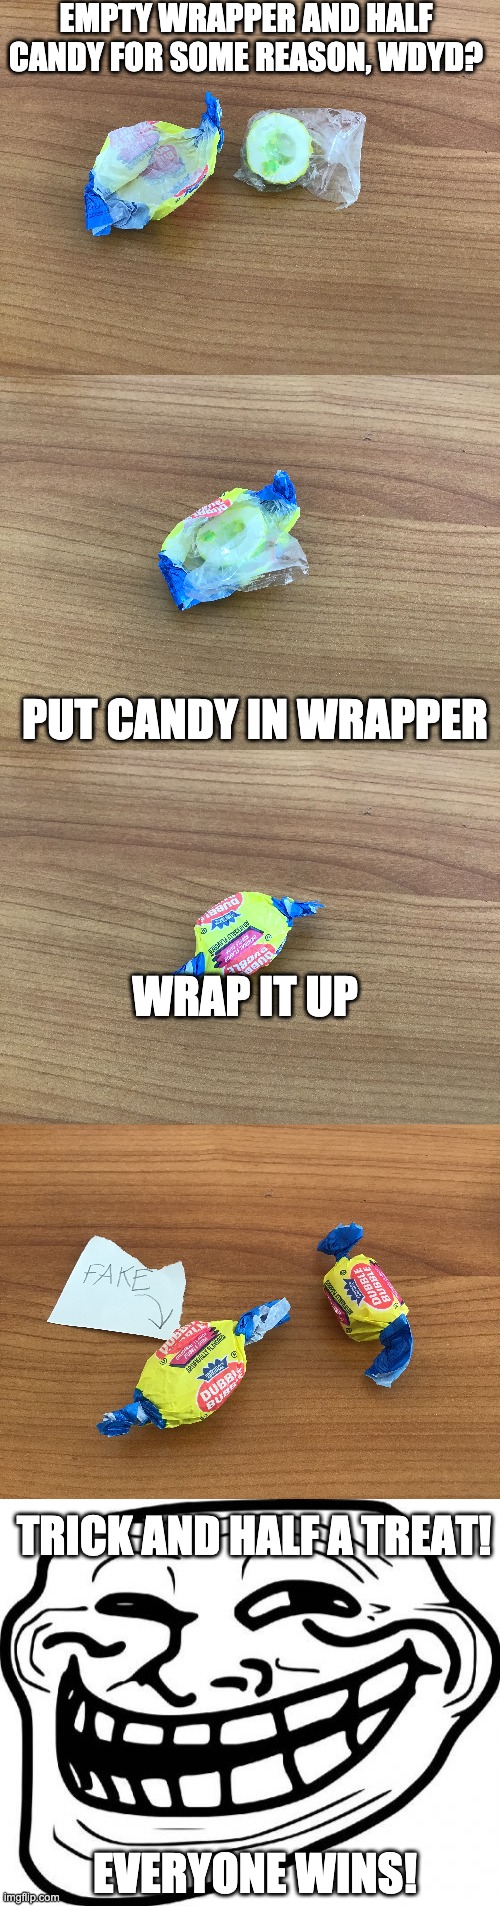 happy halloween everyone!! | EMPTY WRAPPER AND HALF CANDY FOR SOME REASON, WDYD? PUT CANDY IN WRAPPER; WRAP IT UP; TRICK AND HALF A TREAT! EVERYONE WINS! | image tagged in memes,troll face,funny,happy halloween,trick or treat,never gonna give you up | made w/ Imgflip meme maker